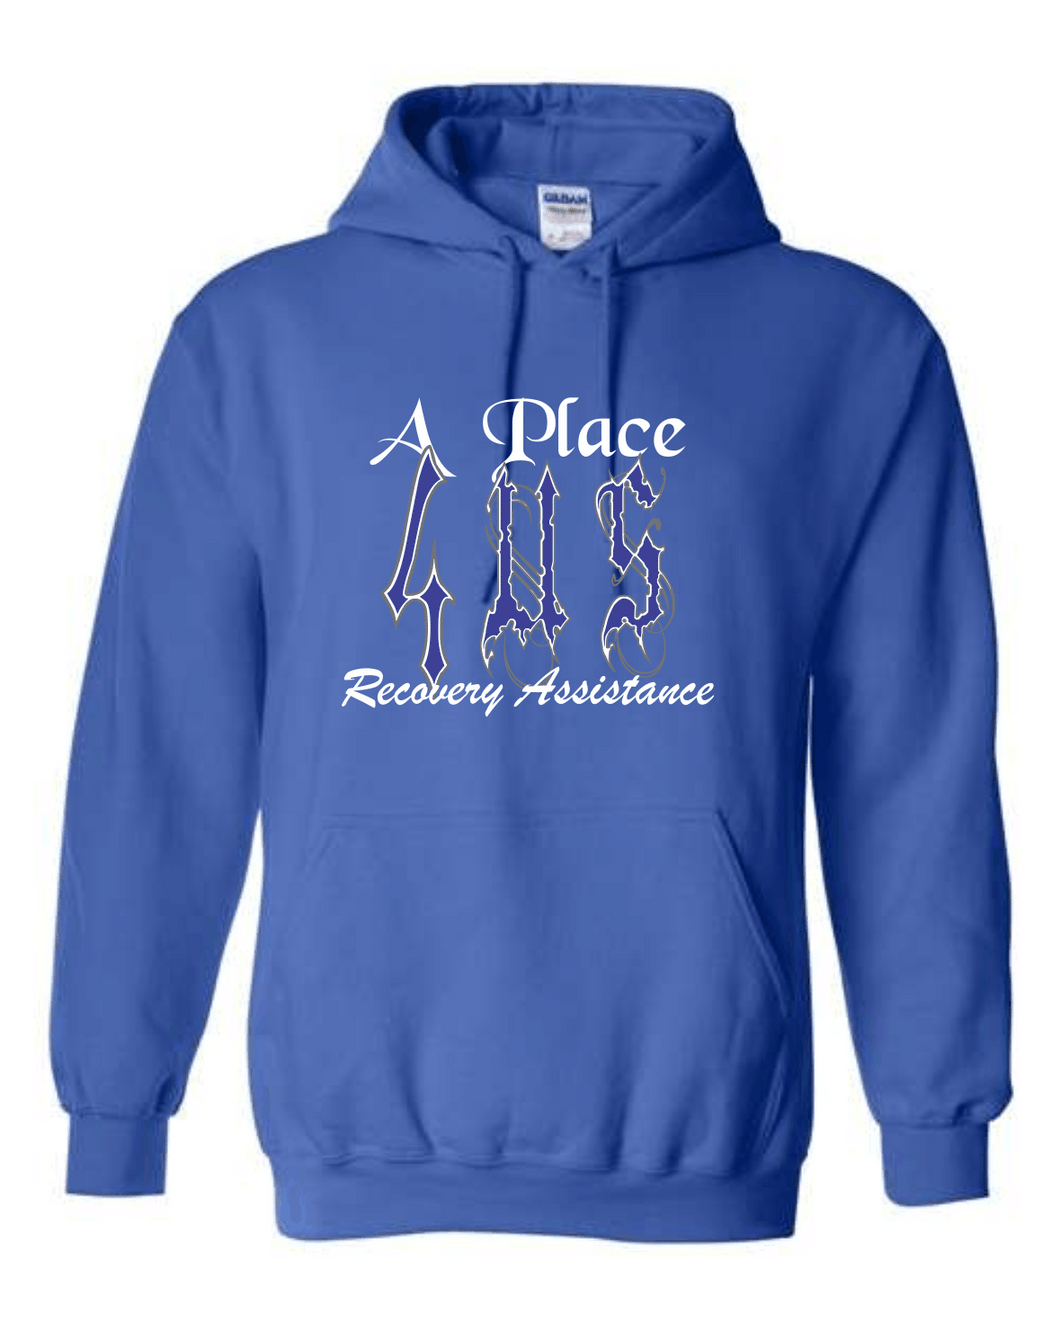 A Place 4US Recovery Assistance .Inc Hoodie